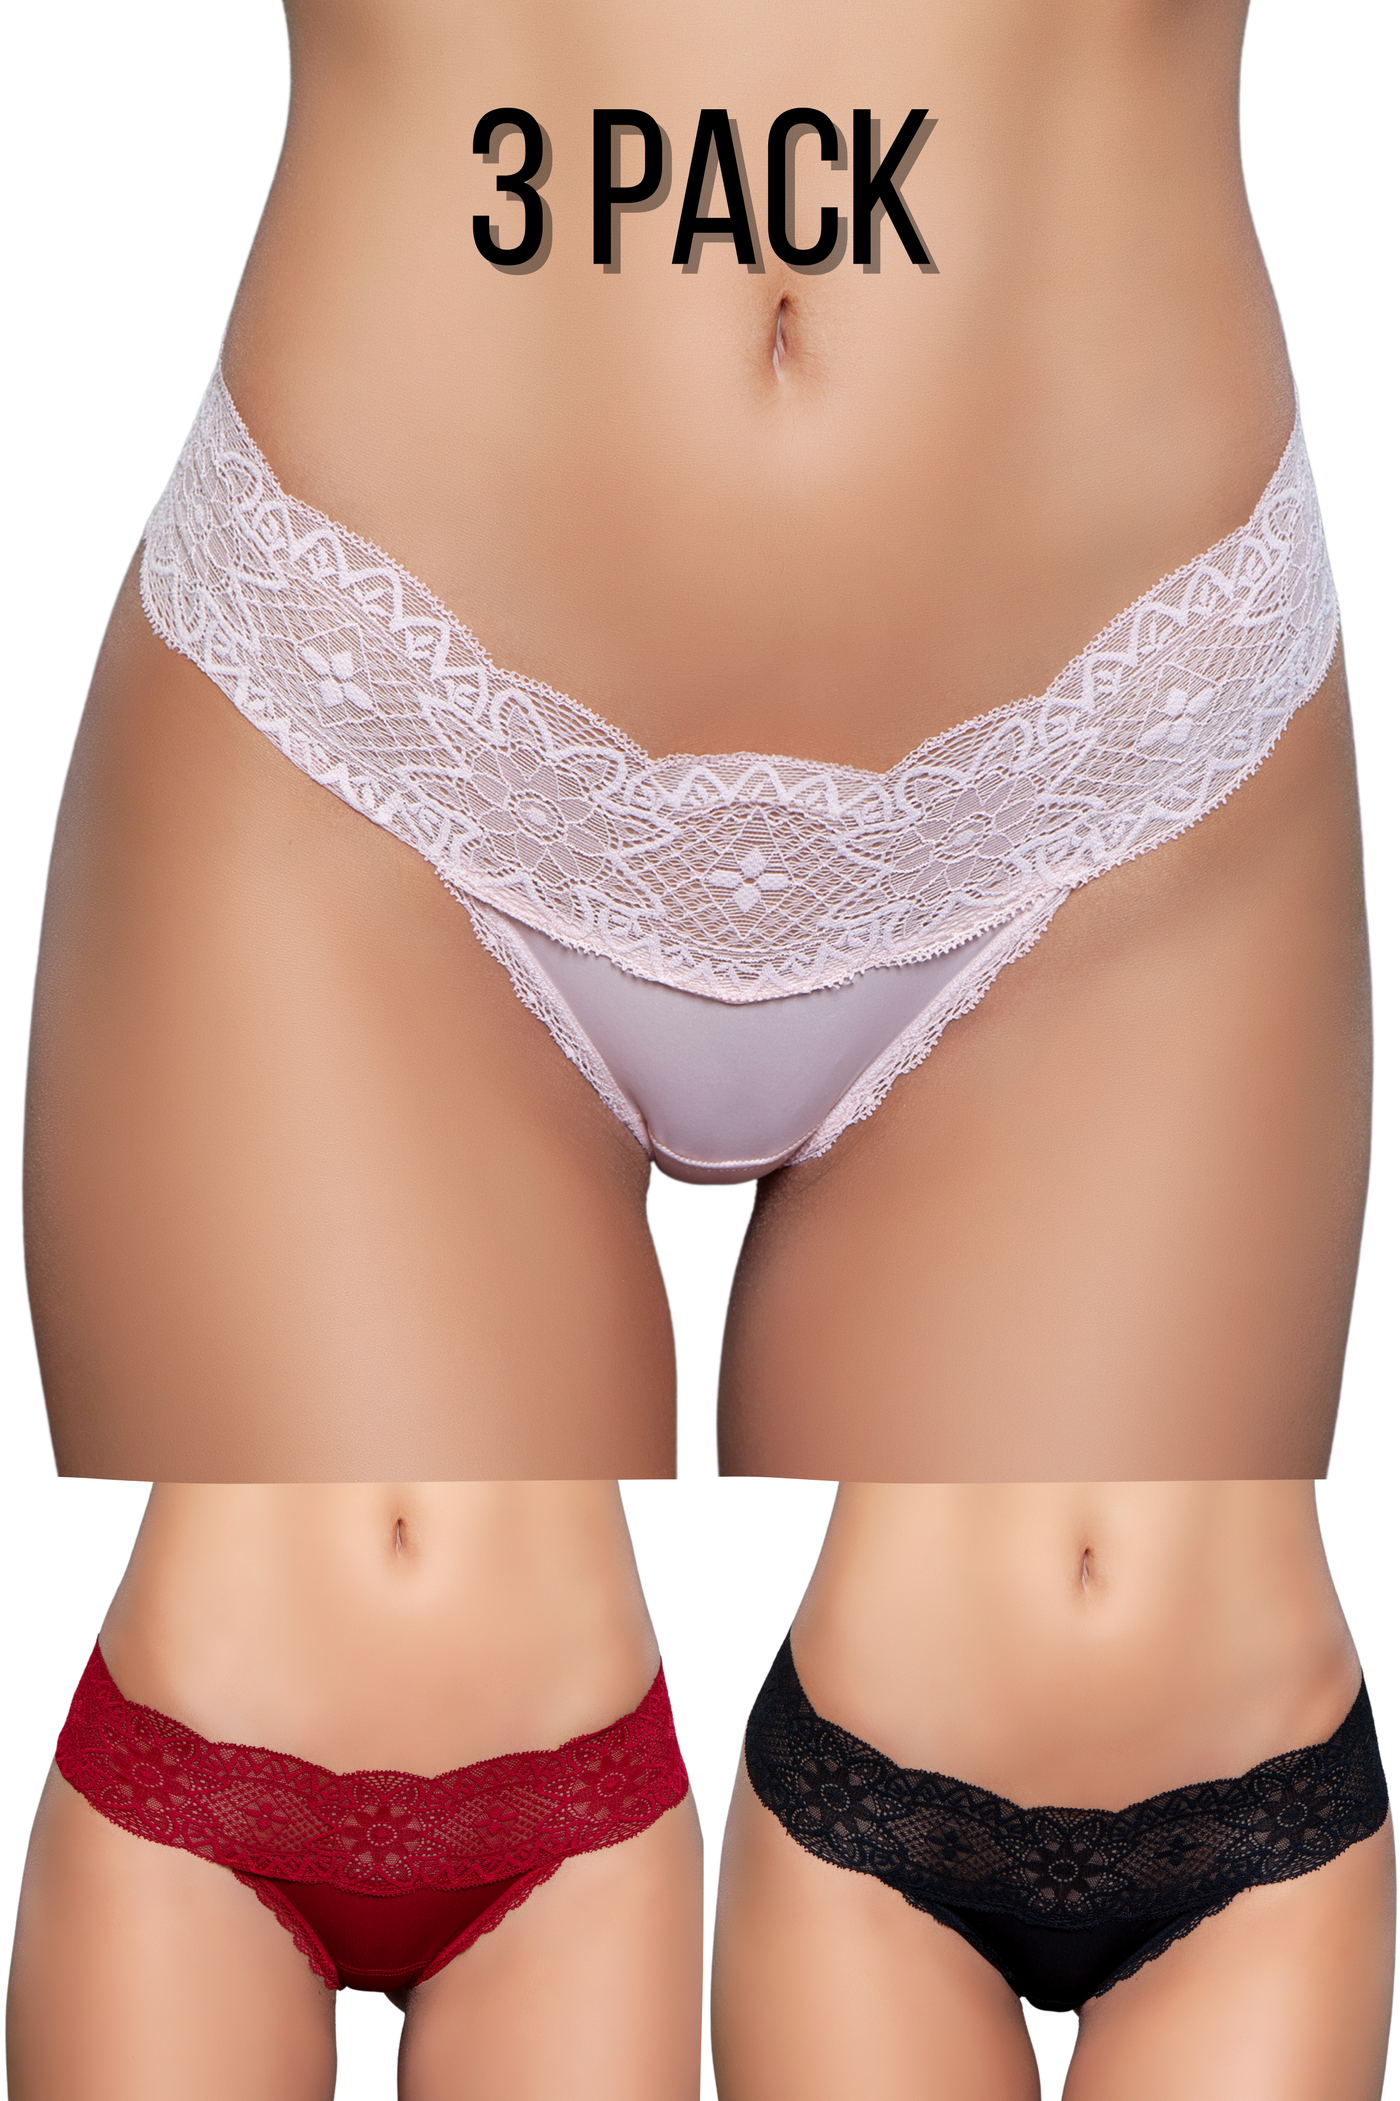 3 Pack Thong Lace Panty - For Love of Lingerie